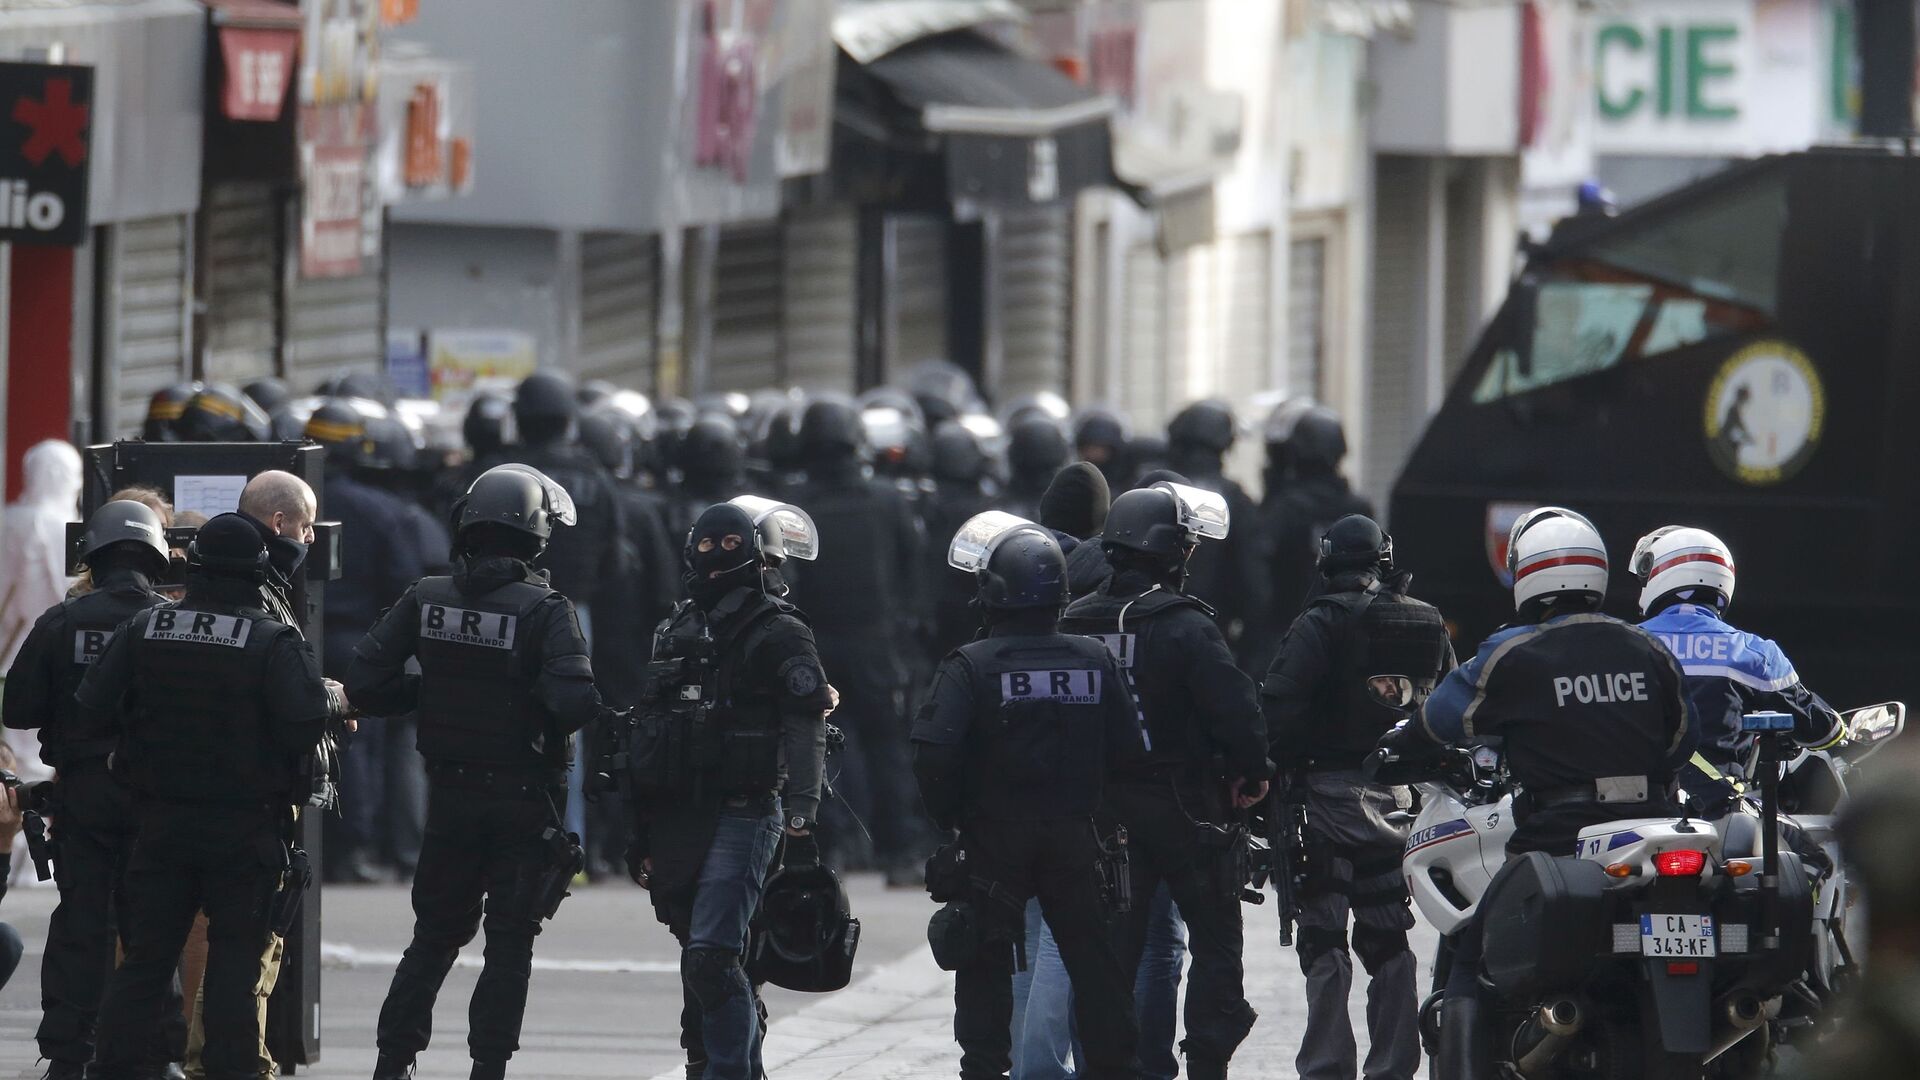 Members of French special police forces of the Research and Intervention Brigade (BRI) are seen near a raid zone in Saint-Denis, near Paris, France, November 18, 2015 - Sputnik International, 1920, 09.02.2022